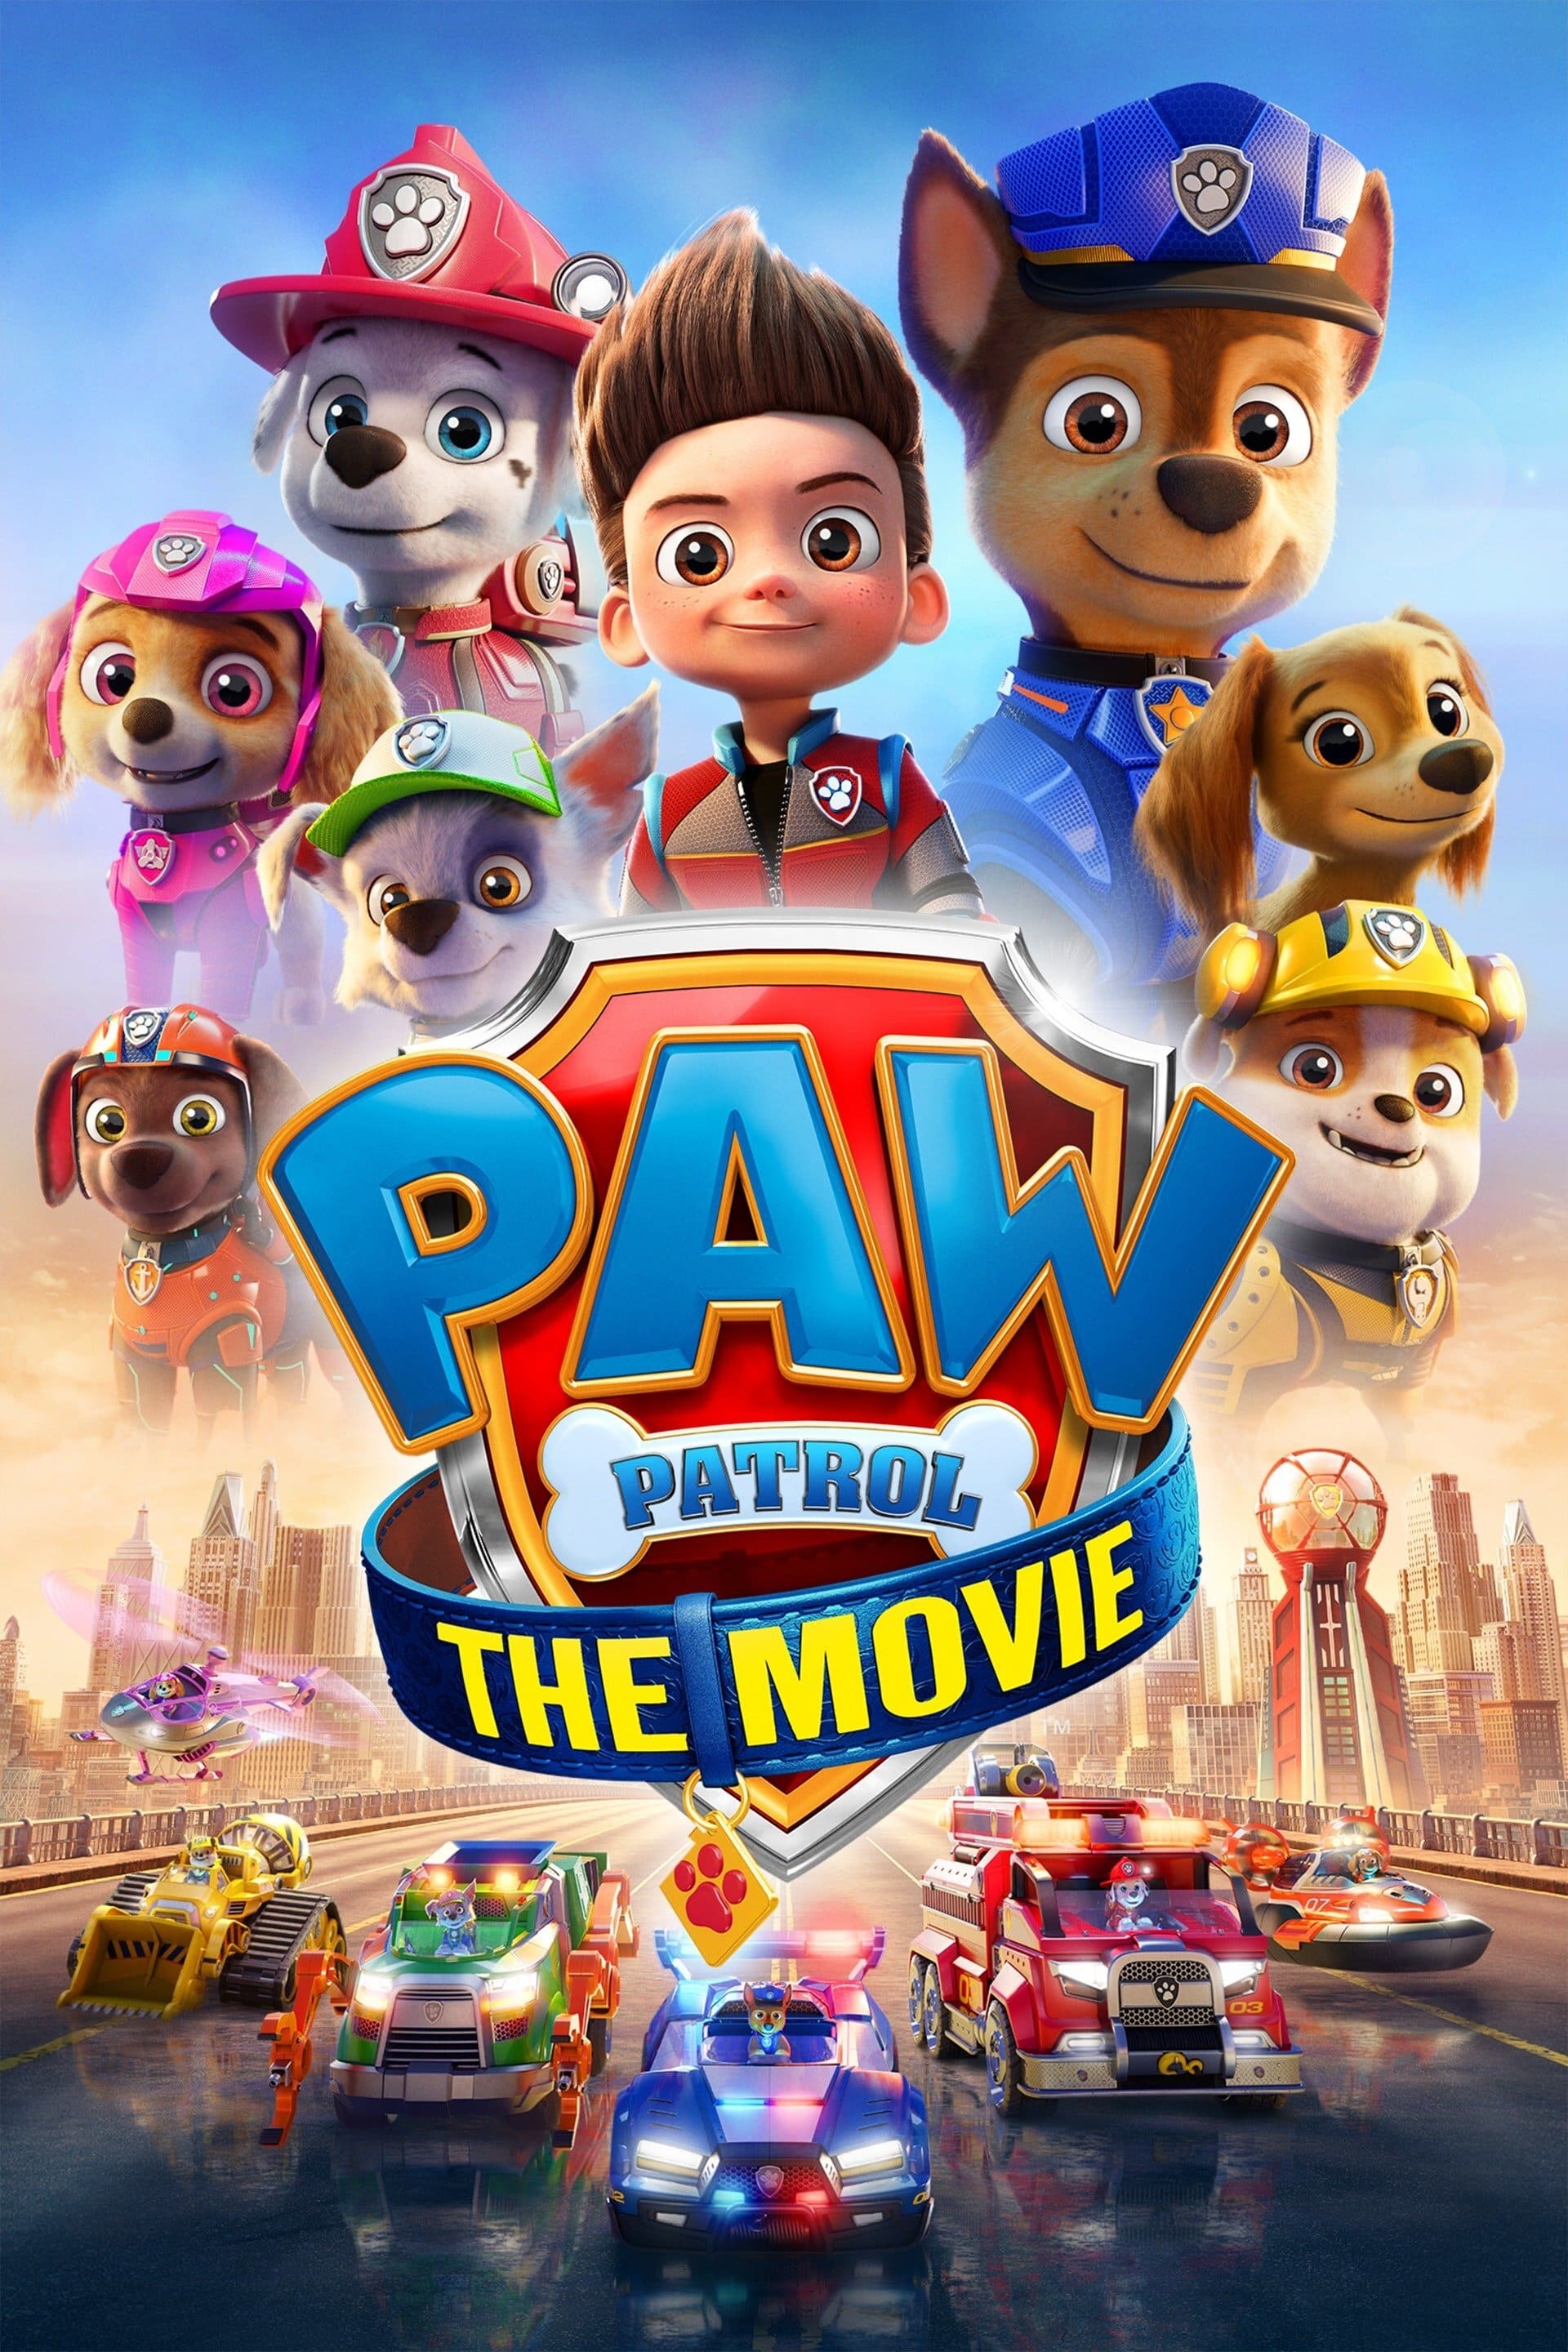 Poster for PAW Patrol: The Movie - logo in the centre, vehicles underneath, characters above, Ryder centre